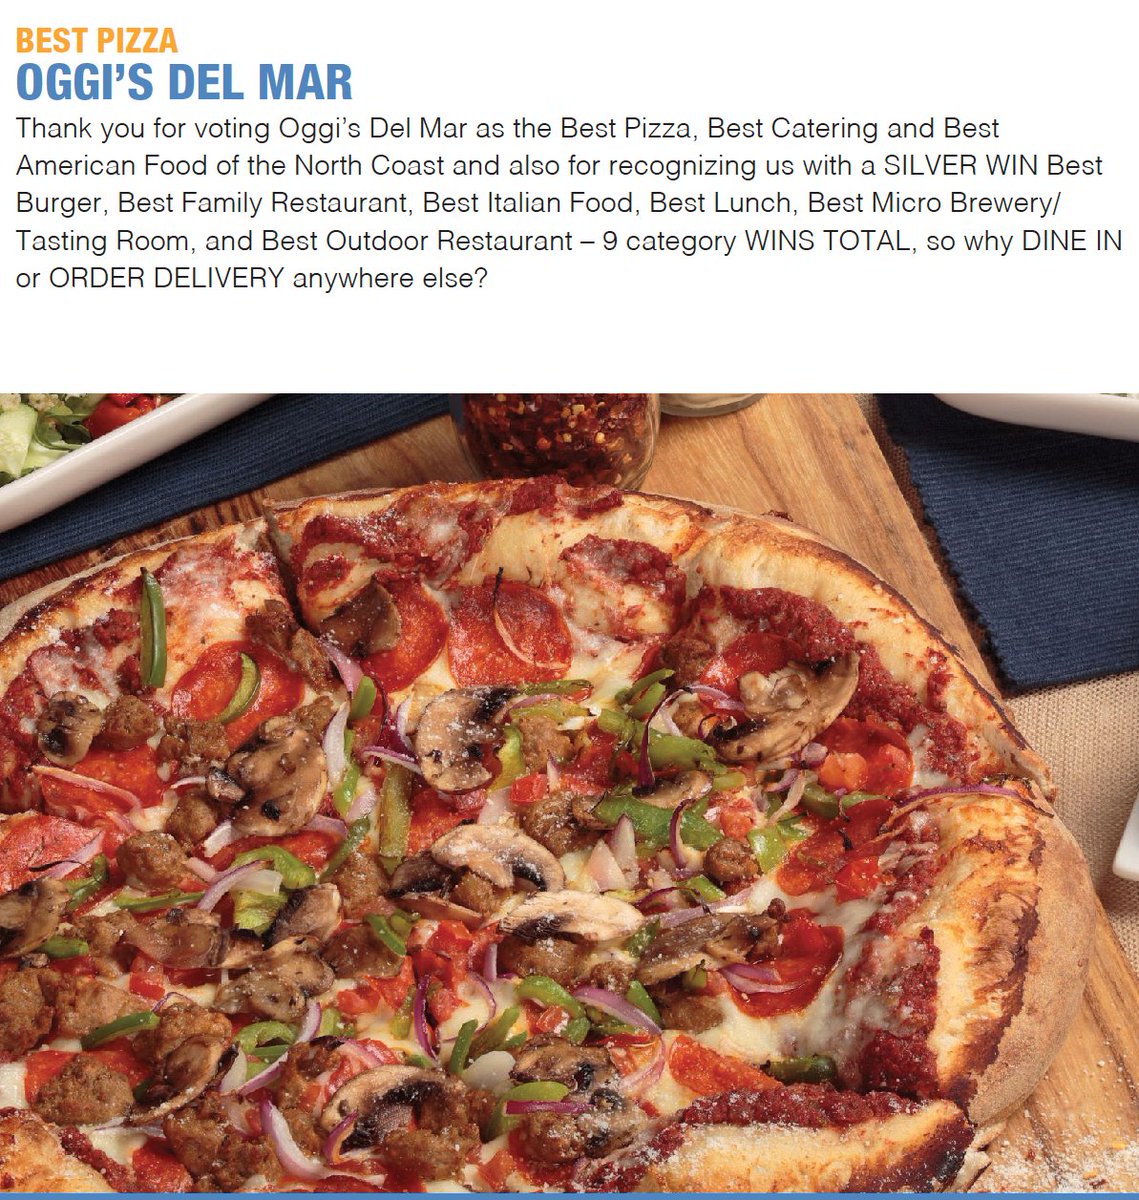 #OggisDM VOTED #BestPizza in Best of No Coast Readers Poll: delmartimes.net/dmt-best-of-no…
Thx we love our CUSTS for 29 yrs of SUPPORT! 
Psst....we won 9 awards so give us a try if you never have! 
Also: #BestCatering #BestFamilyRestaurant #BestBurger #BestLunch #BestOutdoorRestaurant